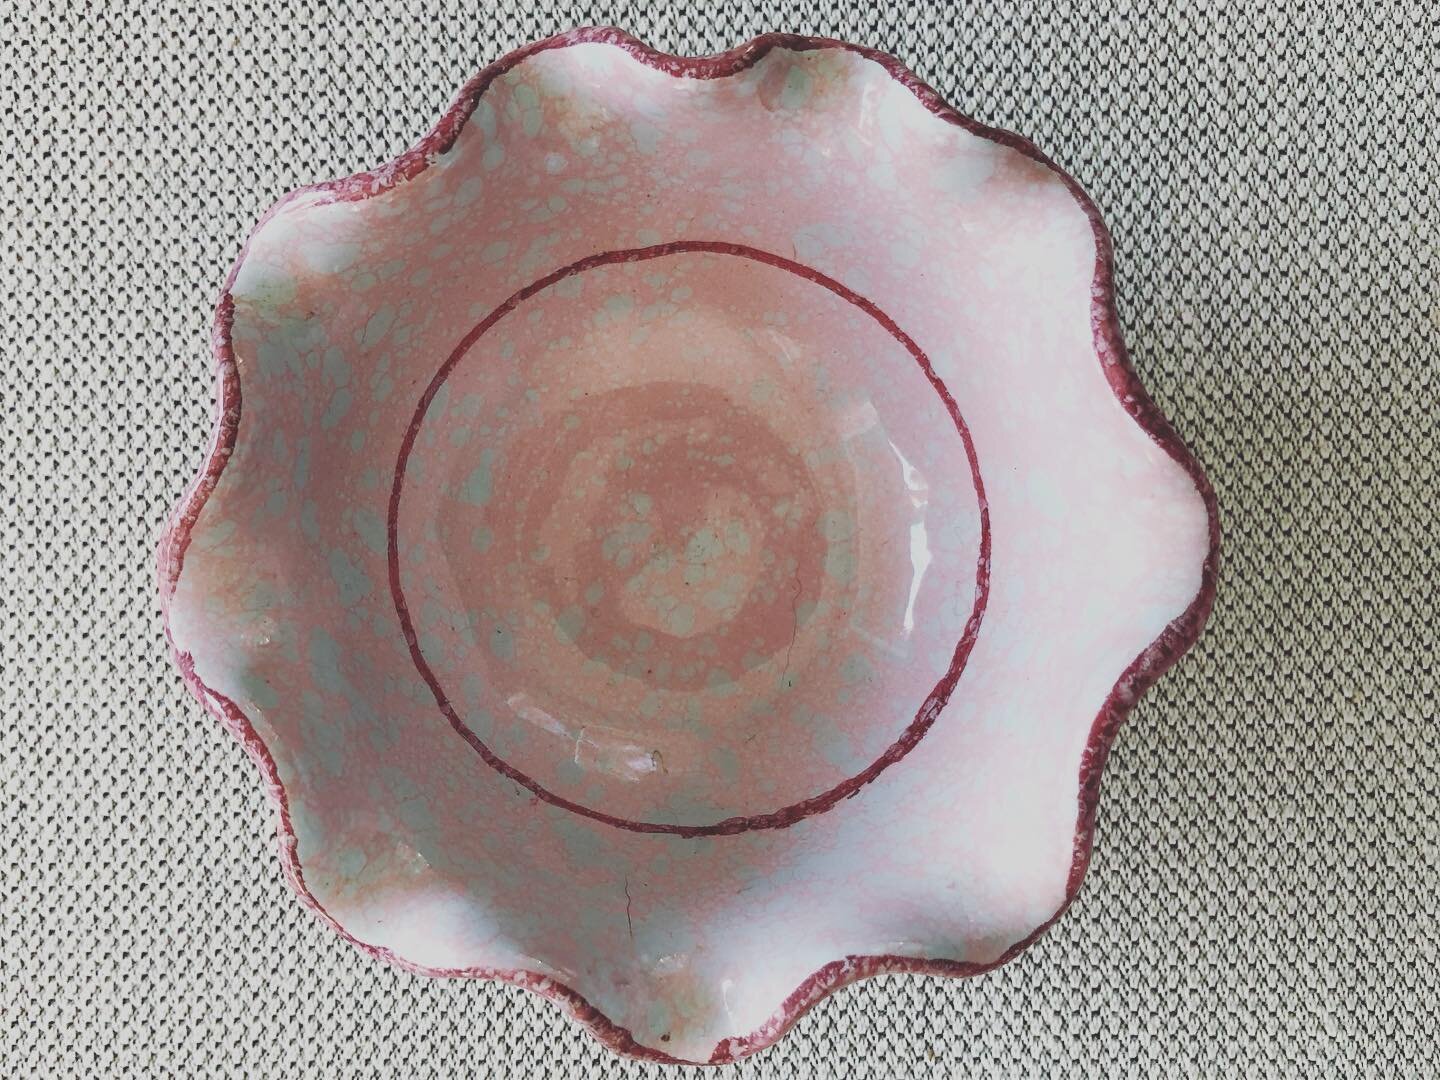 Tiny ceramic bowl from Italy #ceramic #handmade #pink #italy #trecchina #vincenzo #vincenzoamare #marateaporto #ungratefulgranddaughter 

#forsale #garagesale #fleamarket #selling #stuff #secondhand #reuse #reduce #recycle #upcycle #connecticut #gran